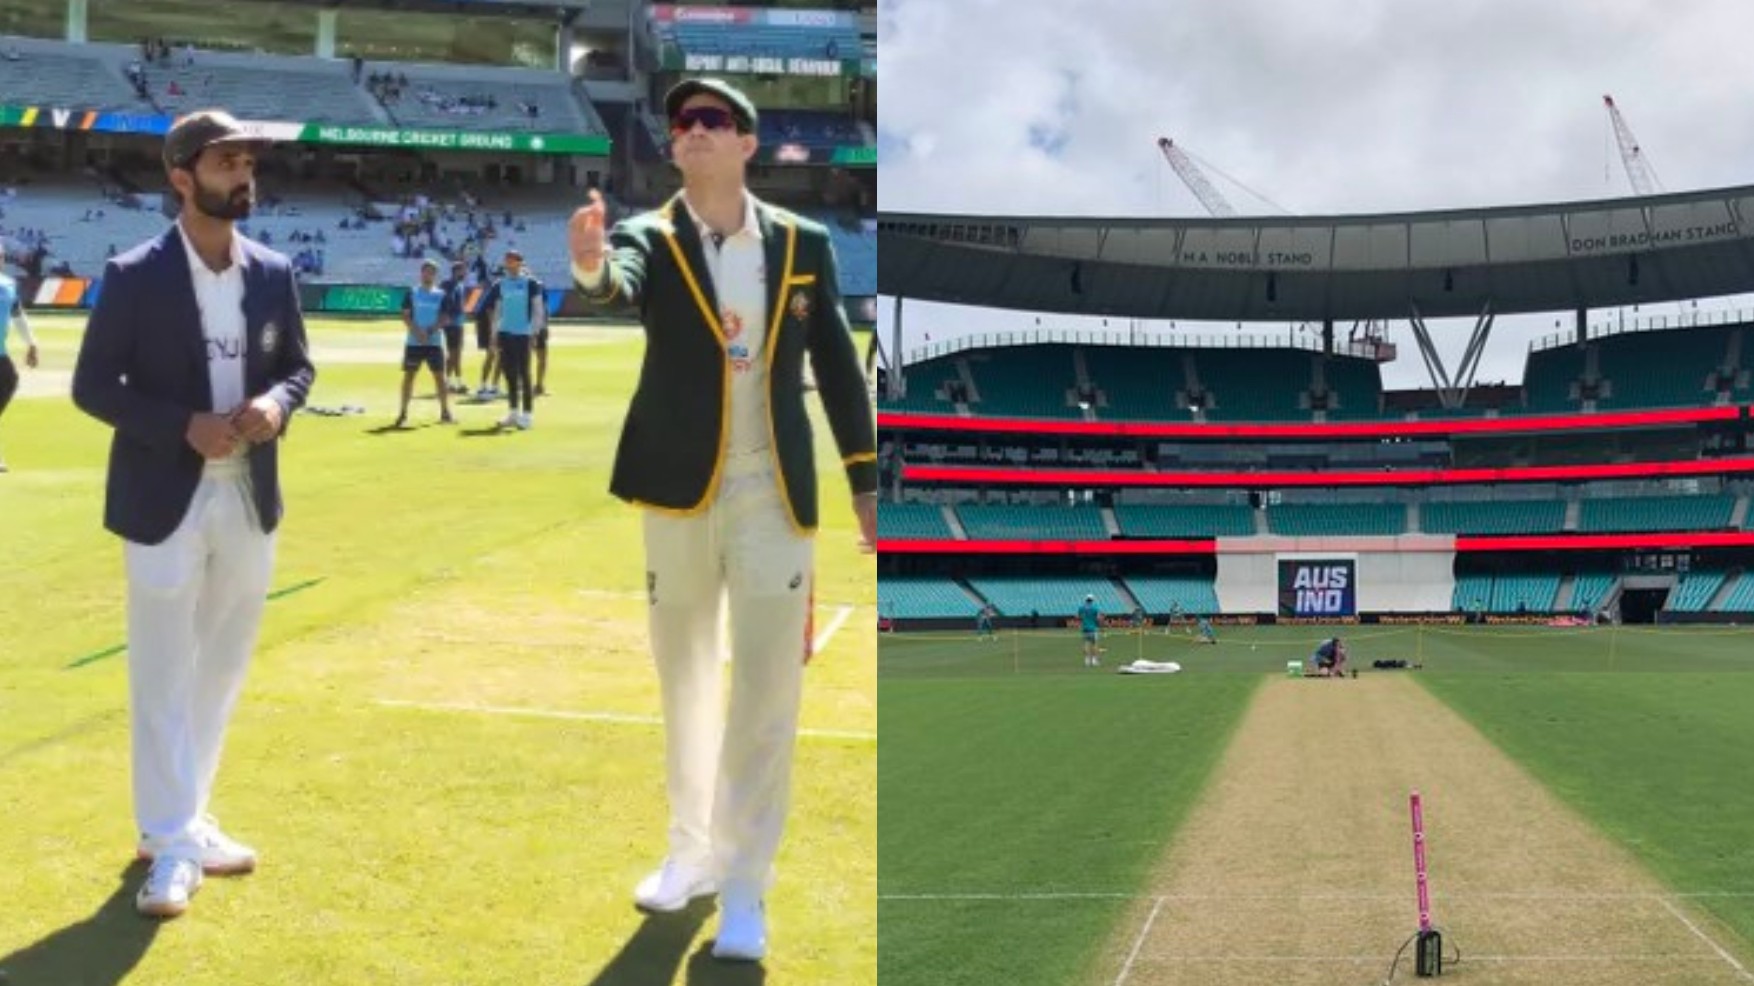 AUS v IND 2020-21: Lots of grass and hard surface awaits Team India at SCG, says curator Adam Lewis